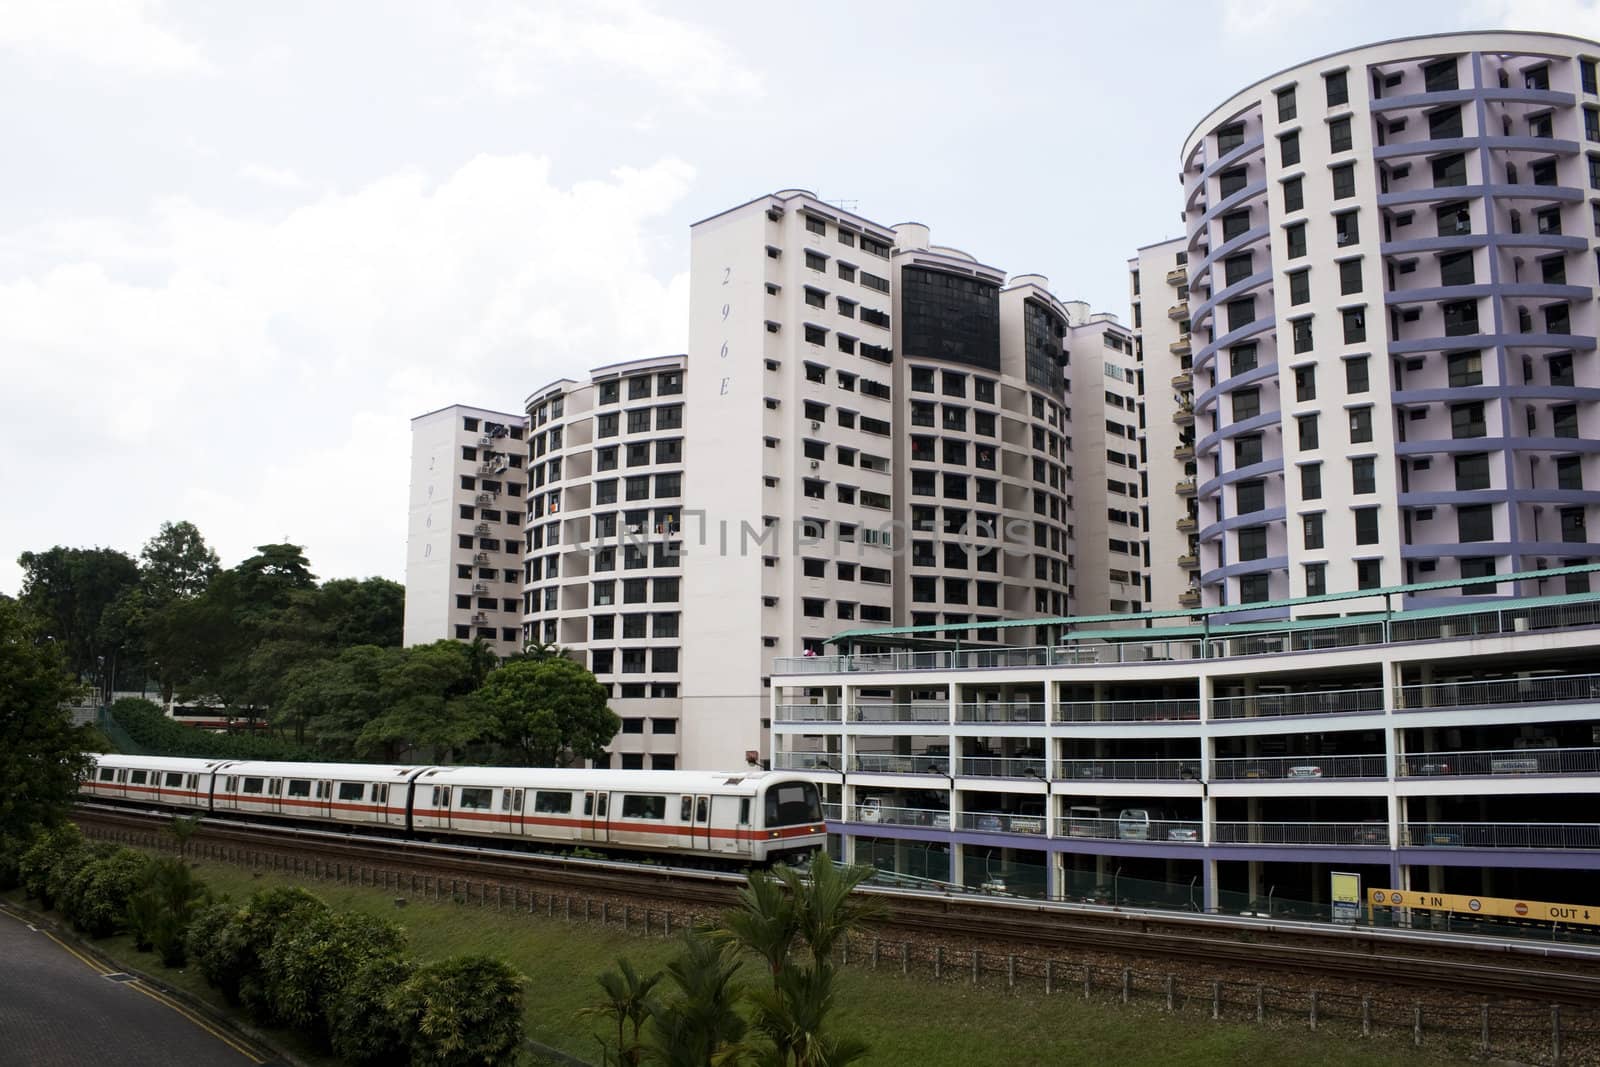 Singapore residential area with train in front.